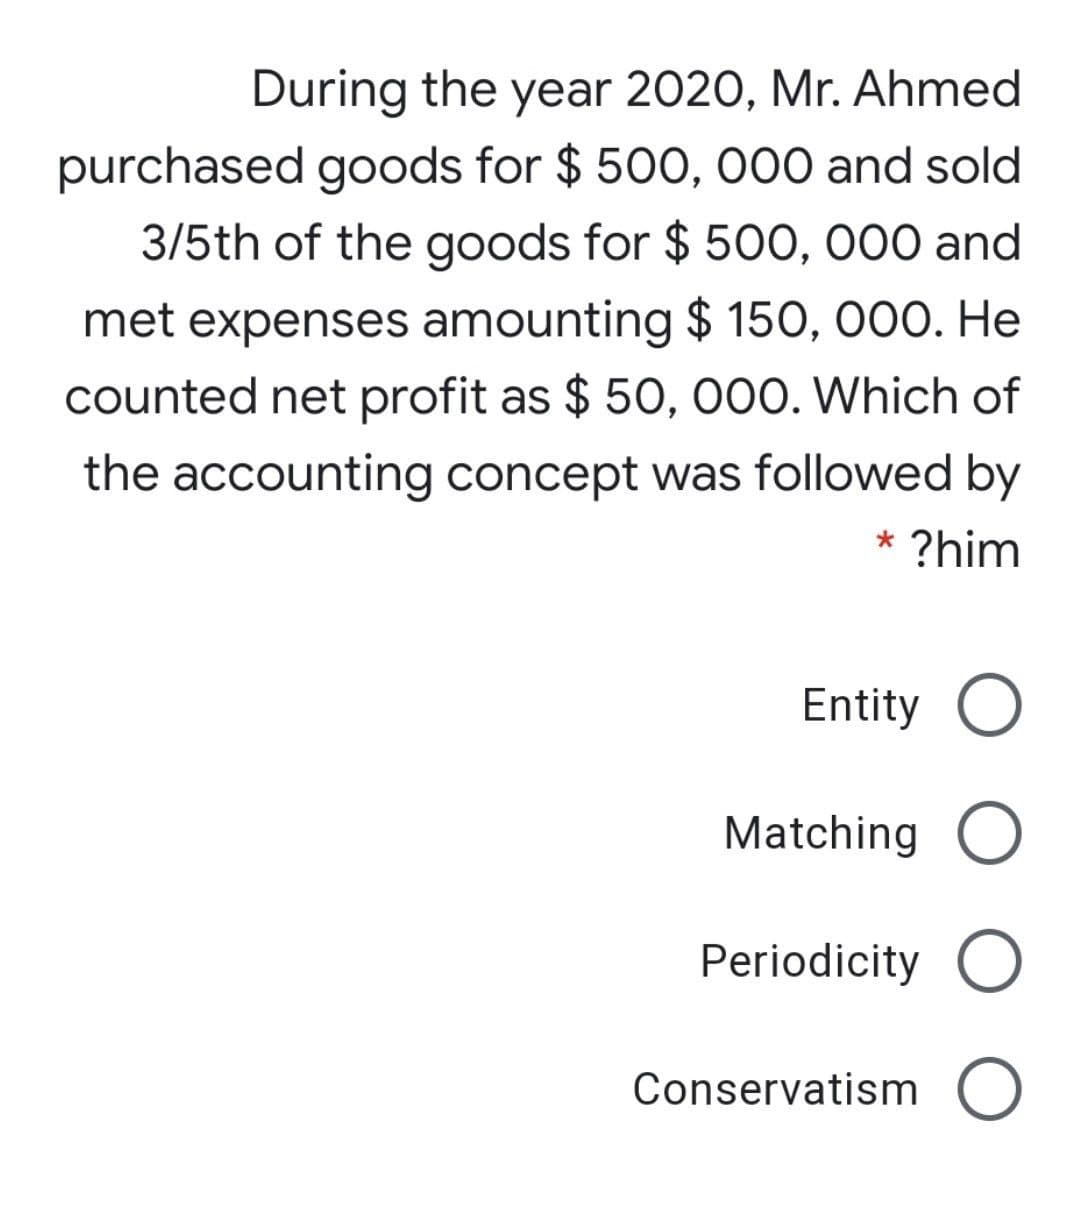 During the year 2020, Mr. Ahmed
purchased goods for $ 500, 000 and sold
3/5th of the goods for $ 50O, 000 and
met expenses amounting $ 150, 000. He
counted net profit as $ 50, 000. Which of
the accounting concept was followed by
* ?him
Entity O
Matching O
Periodicity O
Conservatism O
